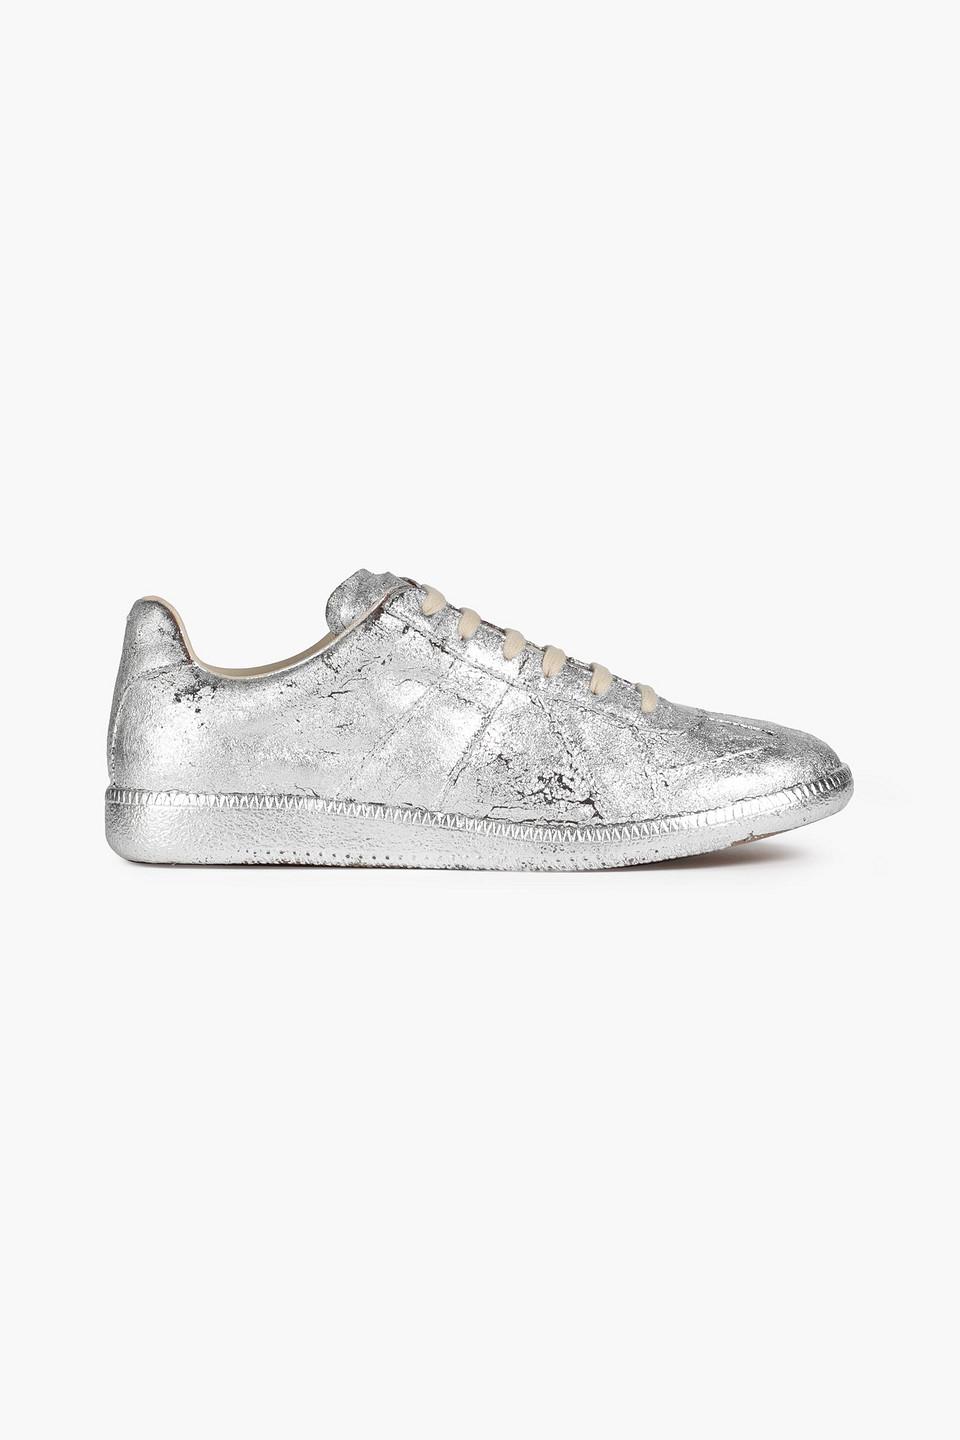 Maison Margiela Cracked-leather Sneakers in Metallic | Lyst